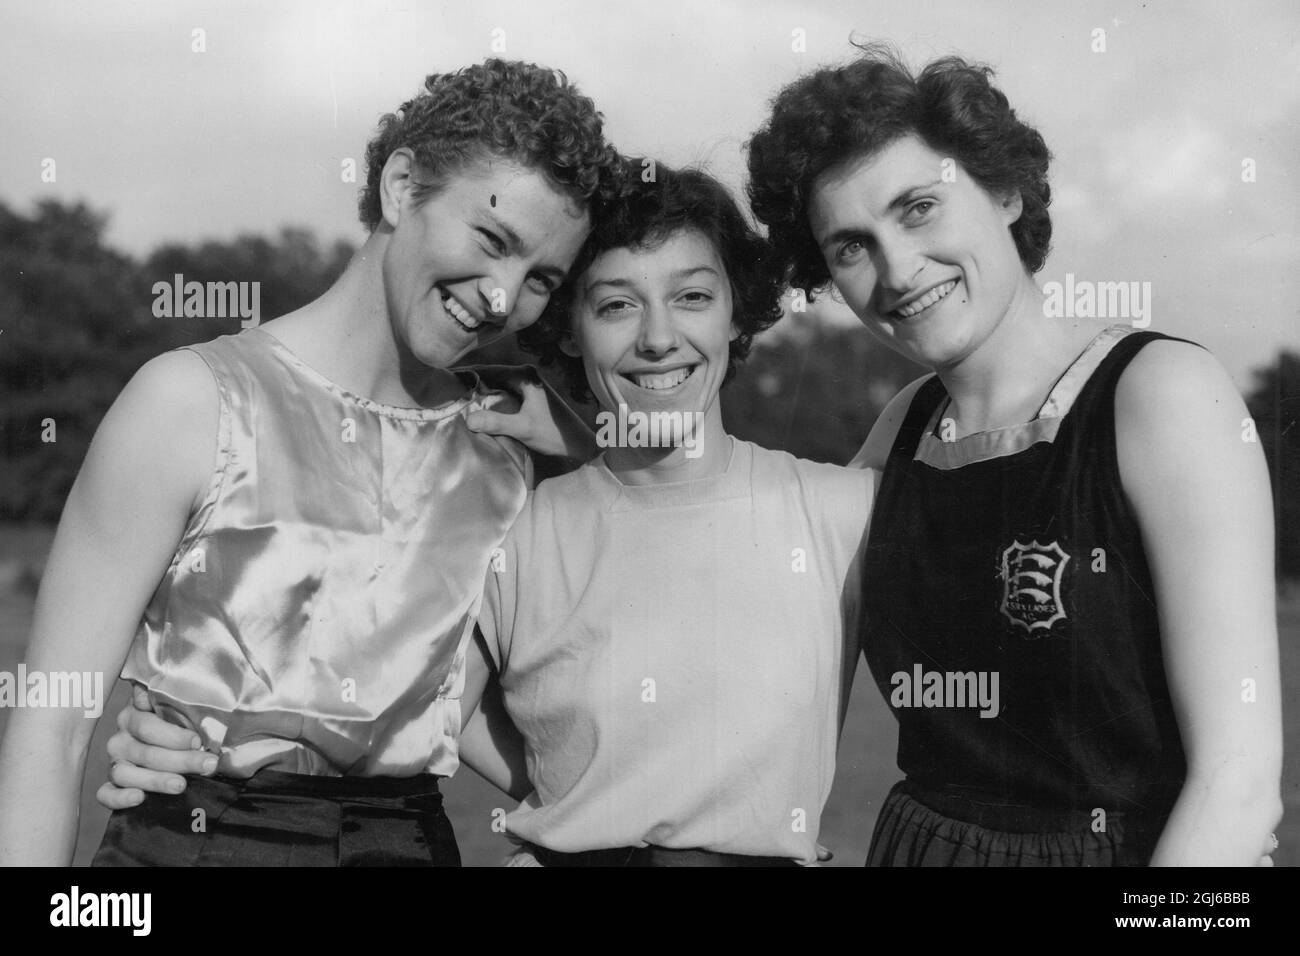 Jean Desforges (right) - seen here with Terry Fisher and Edna Maskell - Essex hurdler and long jumper - competed in 1952 Olympics - photo dated 28 June 1954 Stock Photo